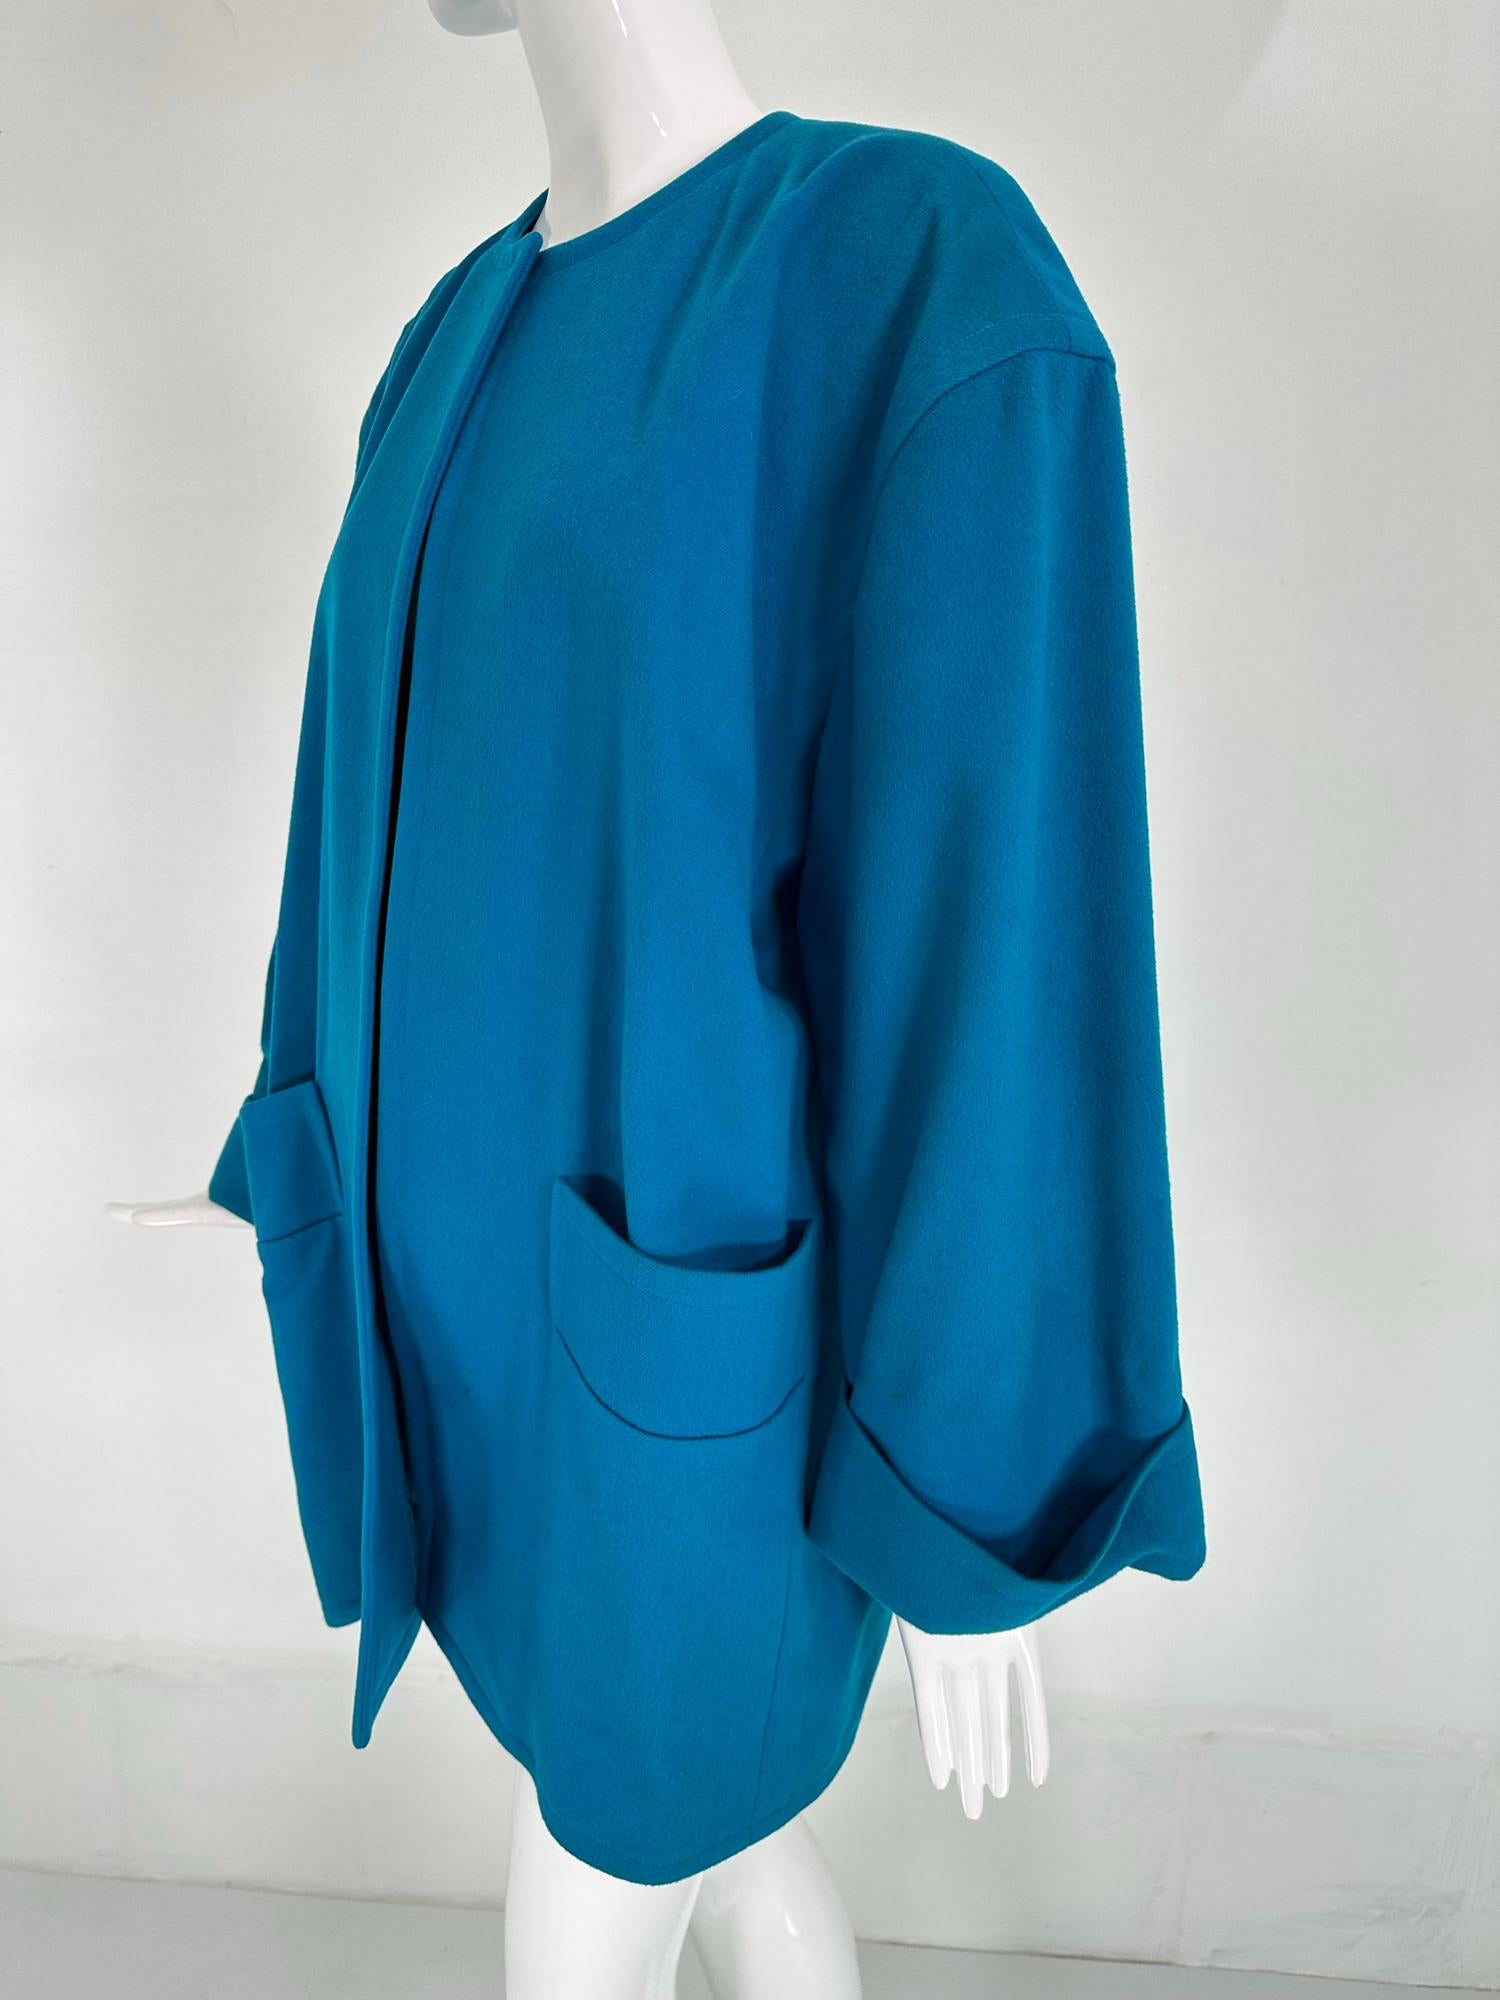 Givenchy Turquoise Wool Open Front Swing Coat with Angled Pockets 1980s For Sale 3